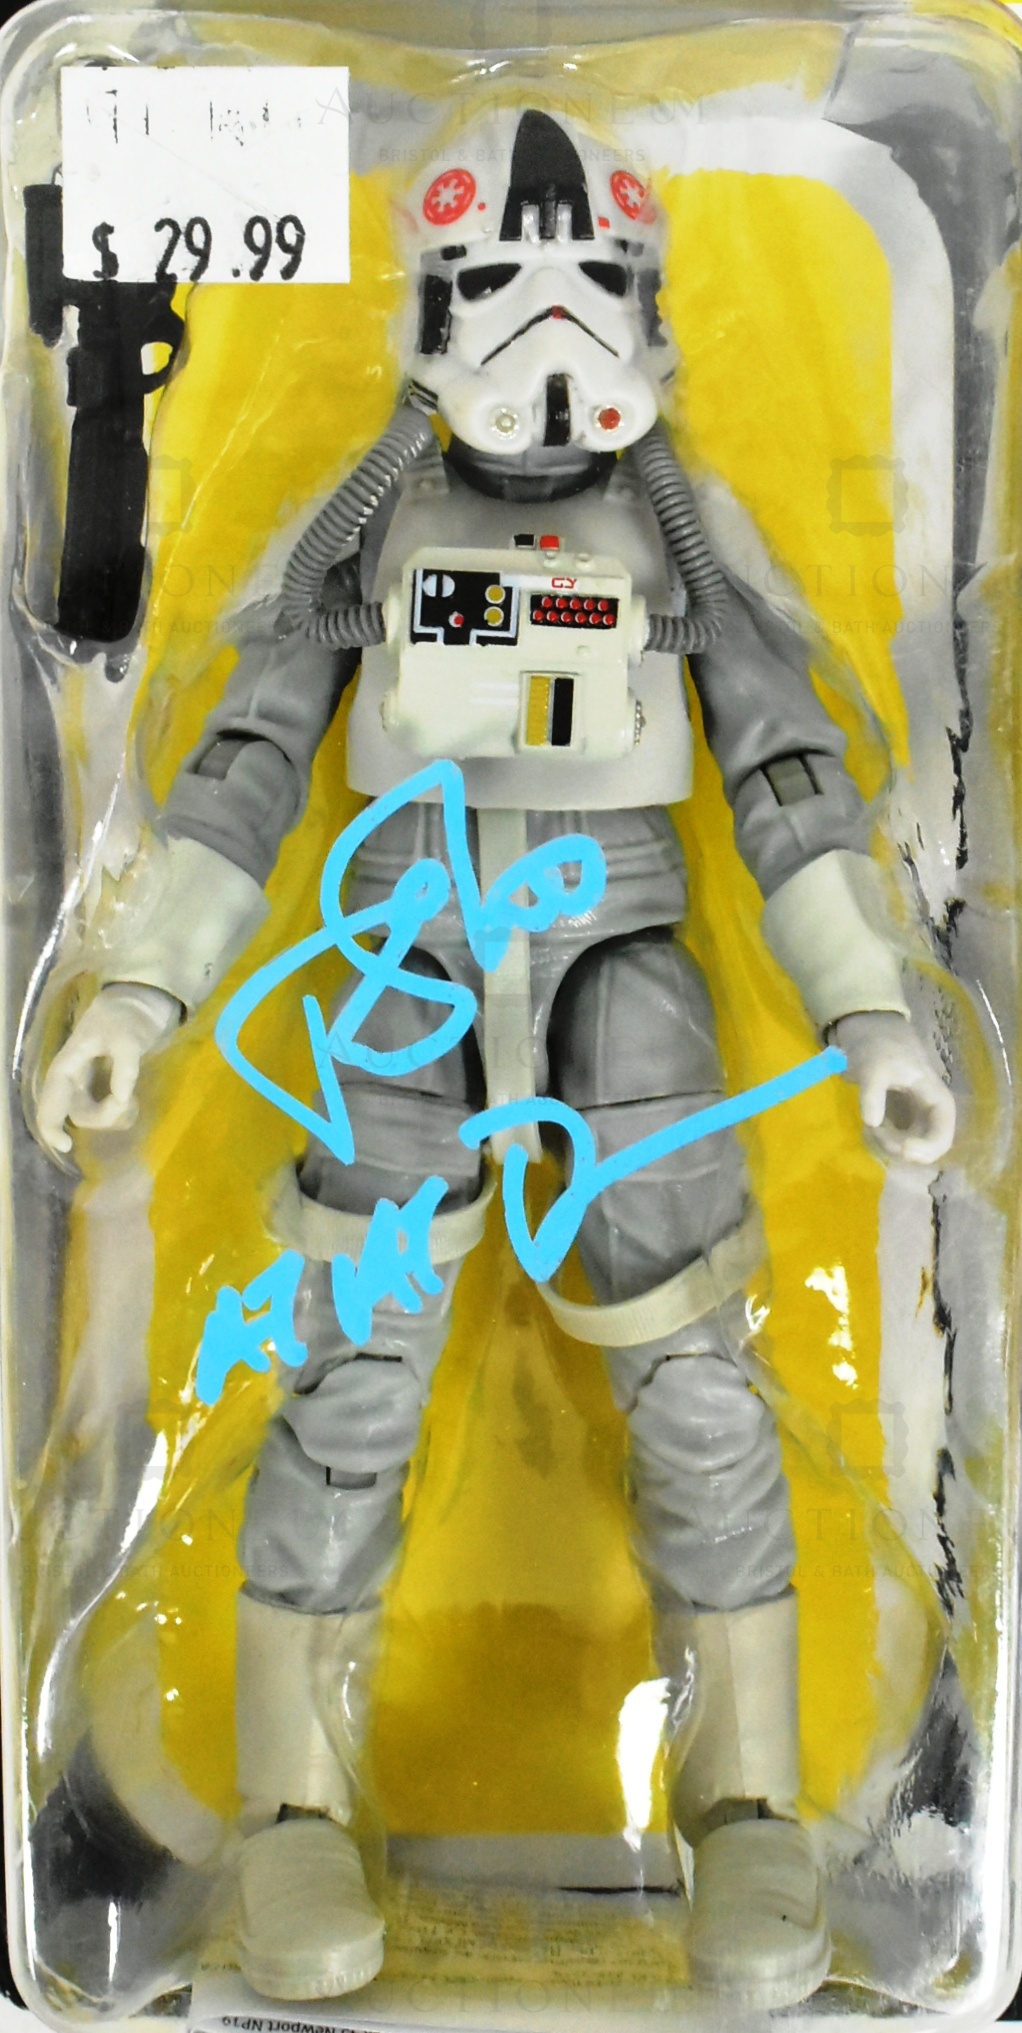 STAR WARS - PAUL JERRICO (AT-AR DRIVER) - SIGNED ACTION FIGURE - Image 2 of 4